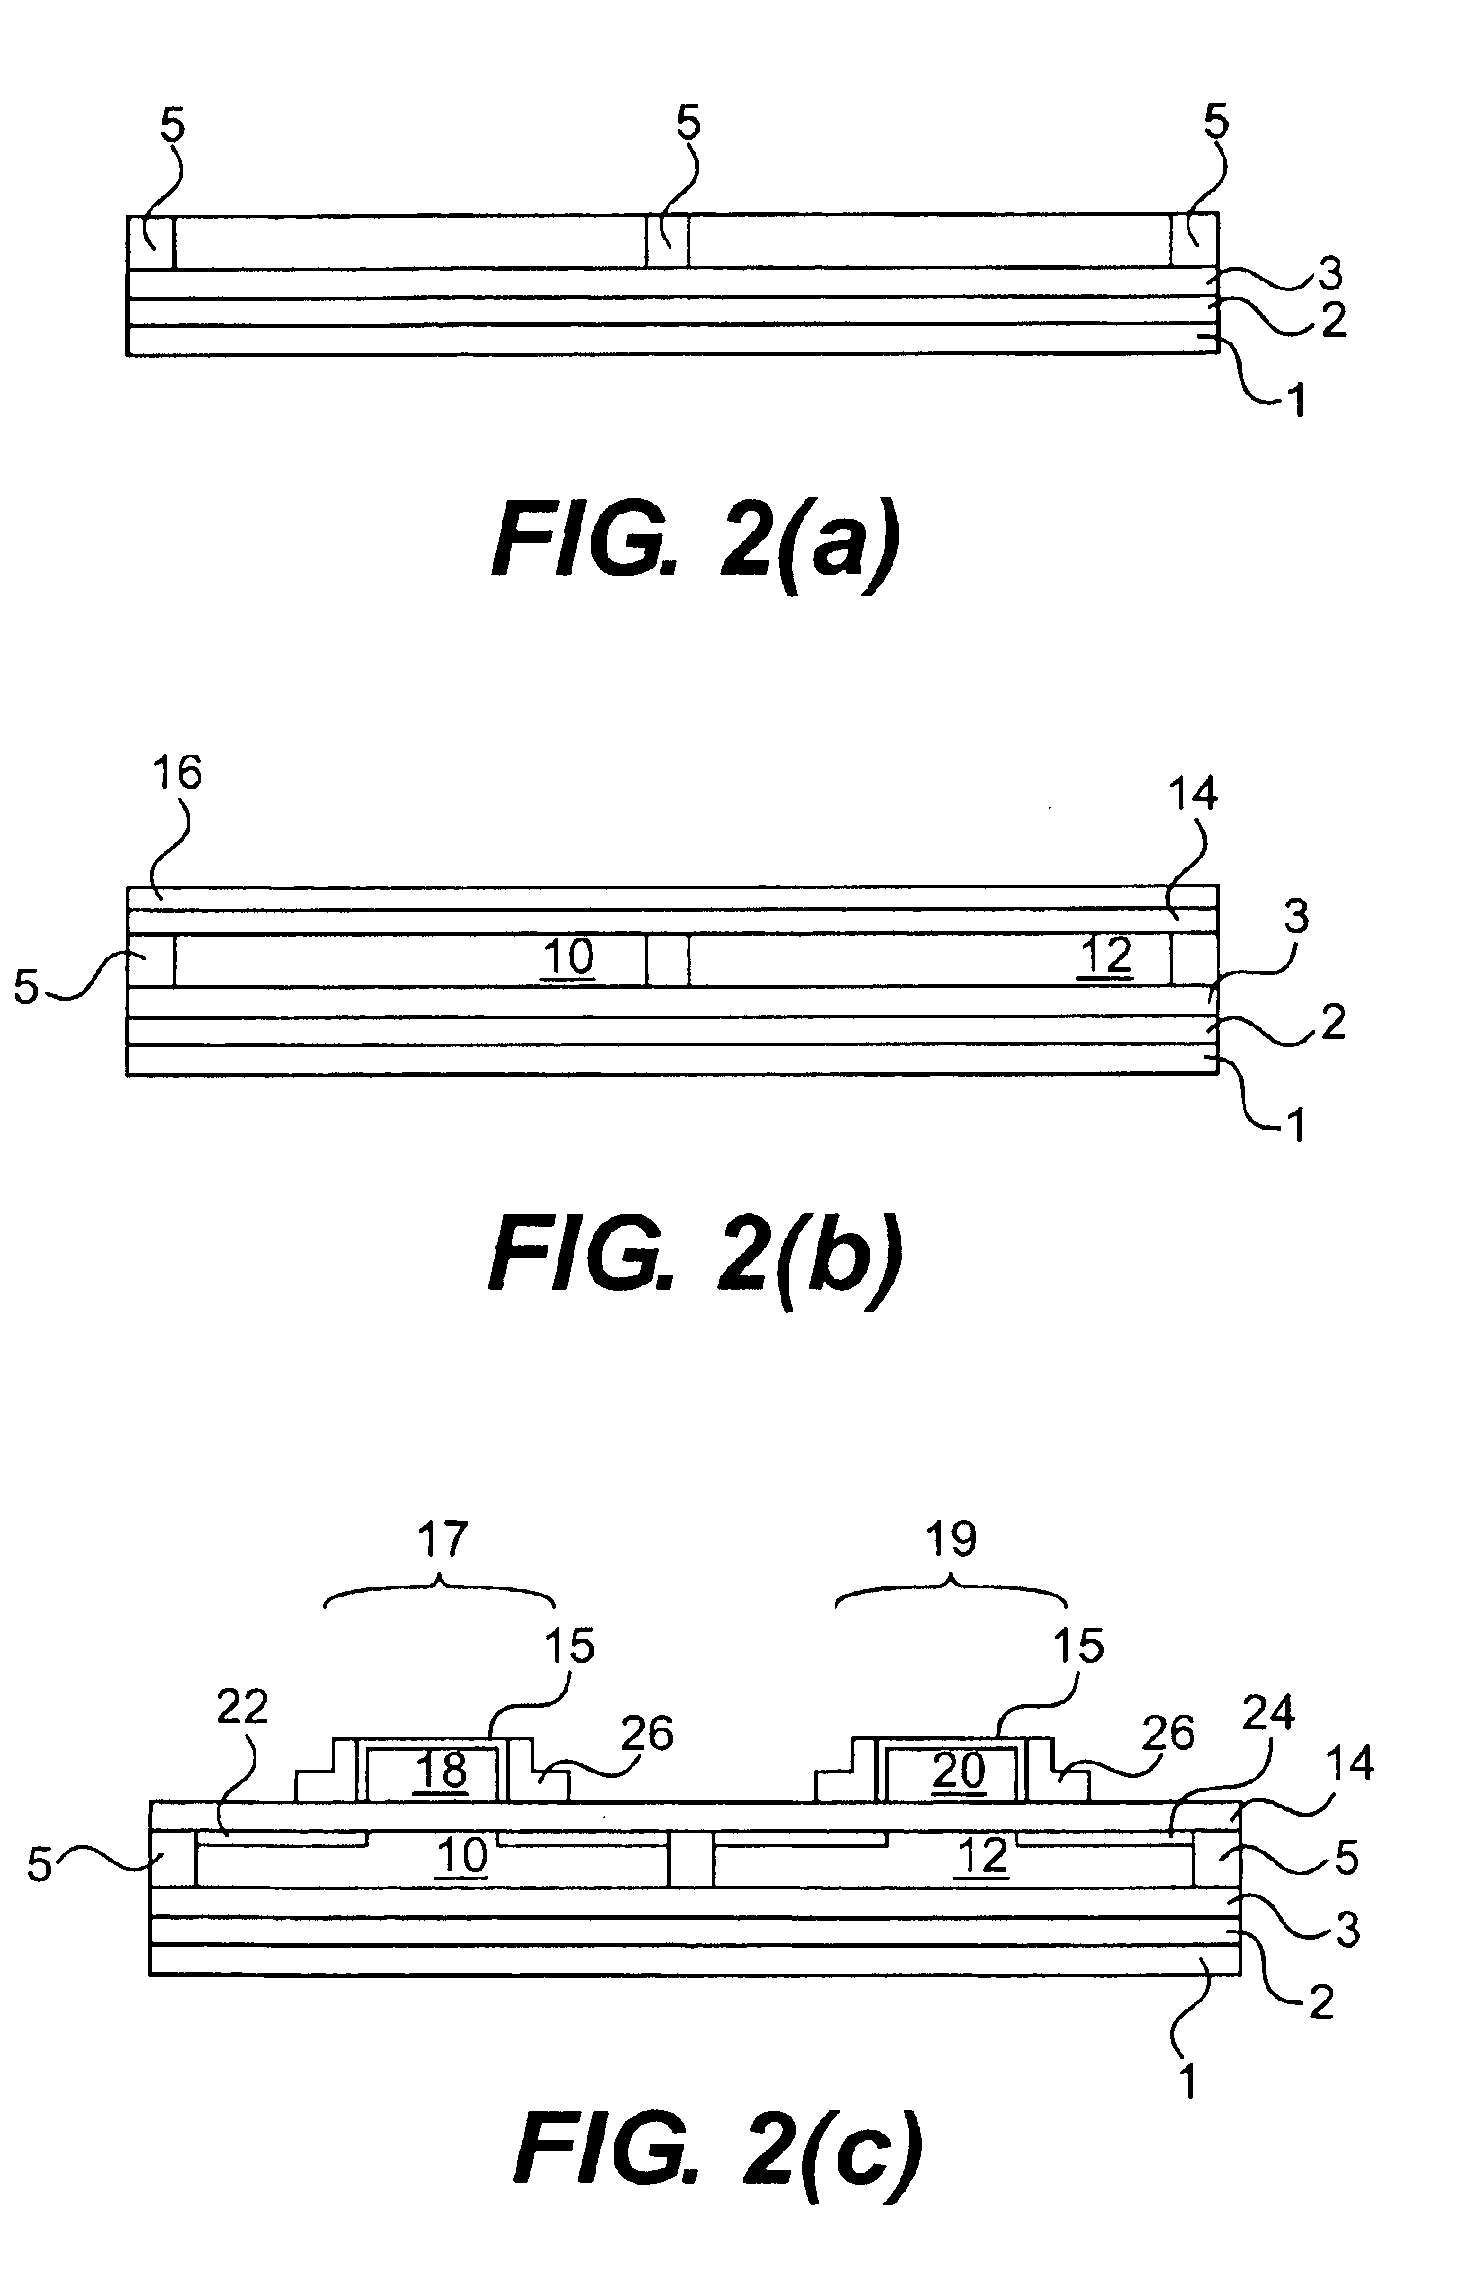 Silicide proximity structures for CMOS device performance improvements